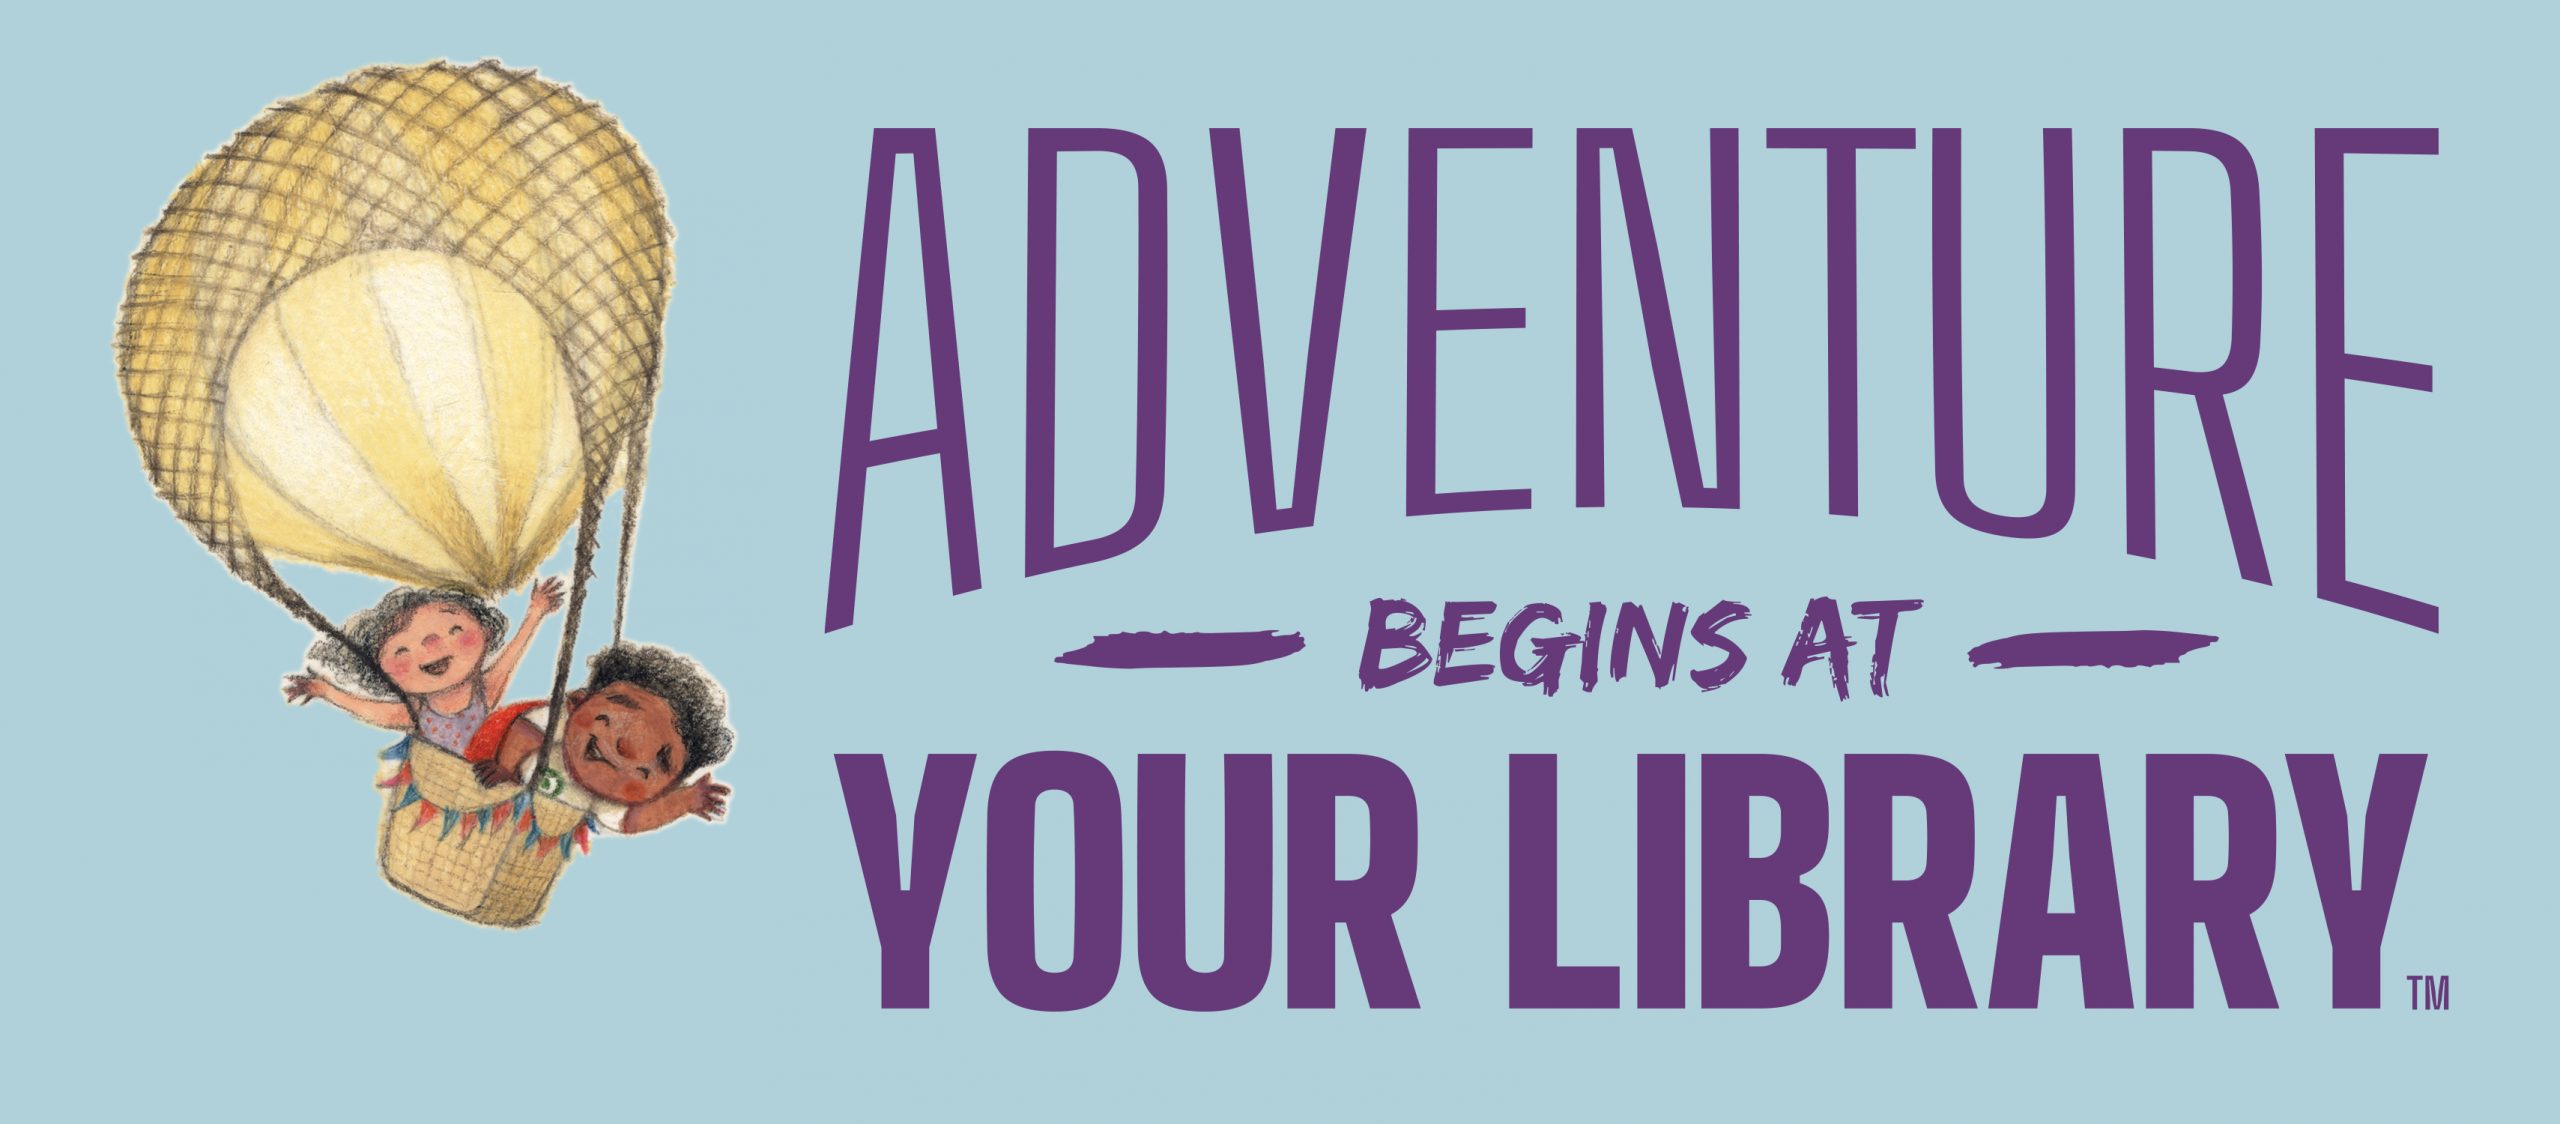 Adventure Begins at Your Library - Summer Reading 2024